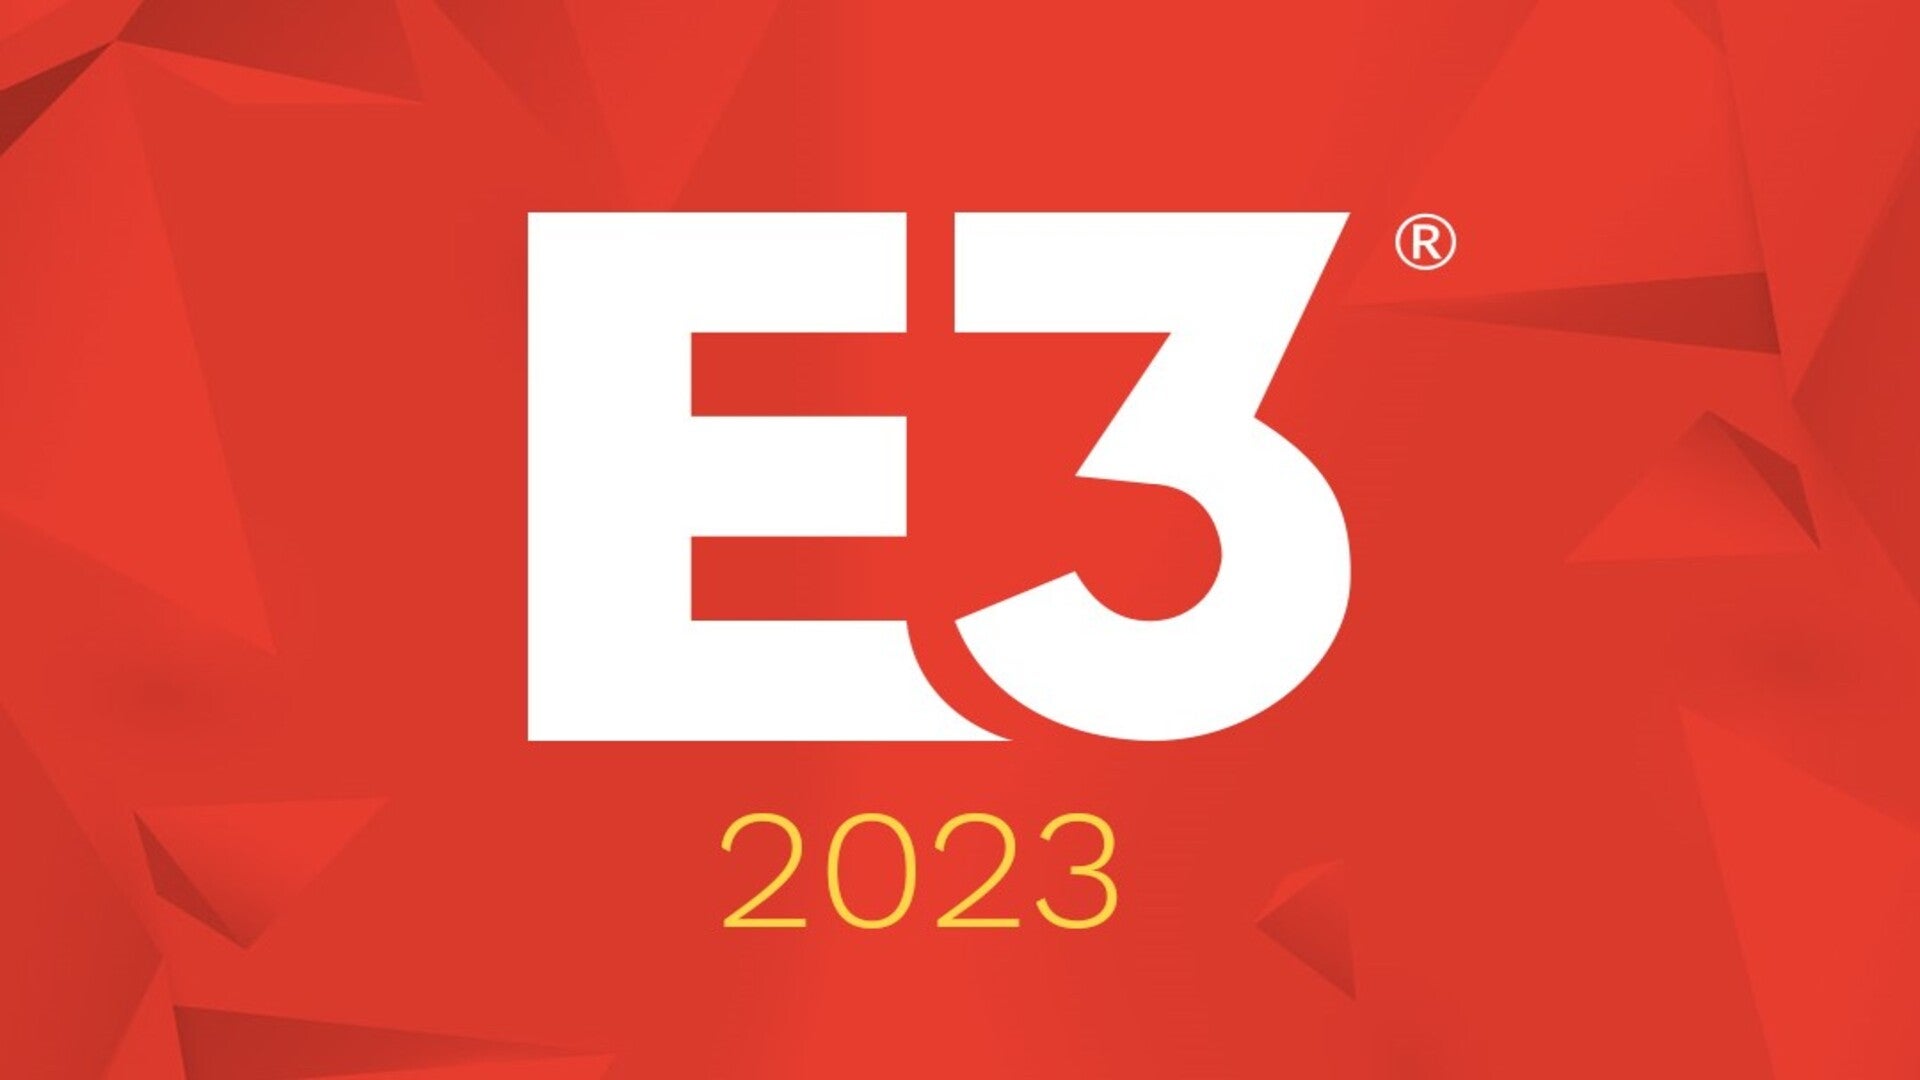 Image for E3 2023 has been cancelled